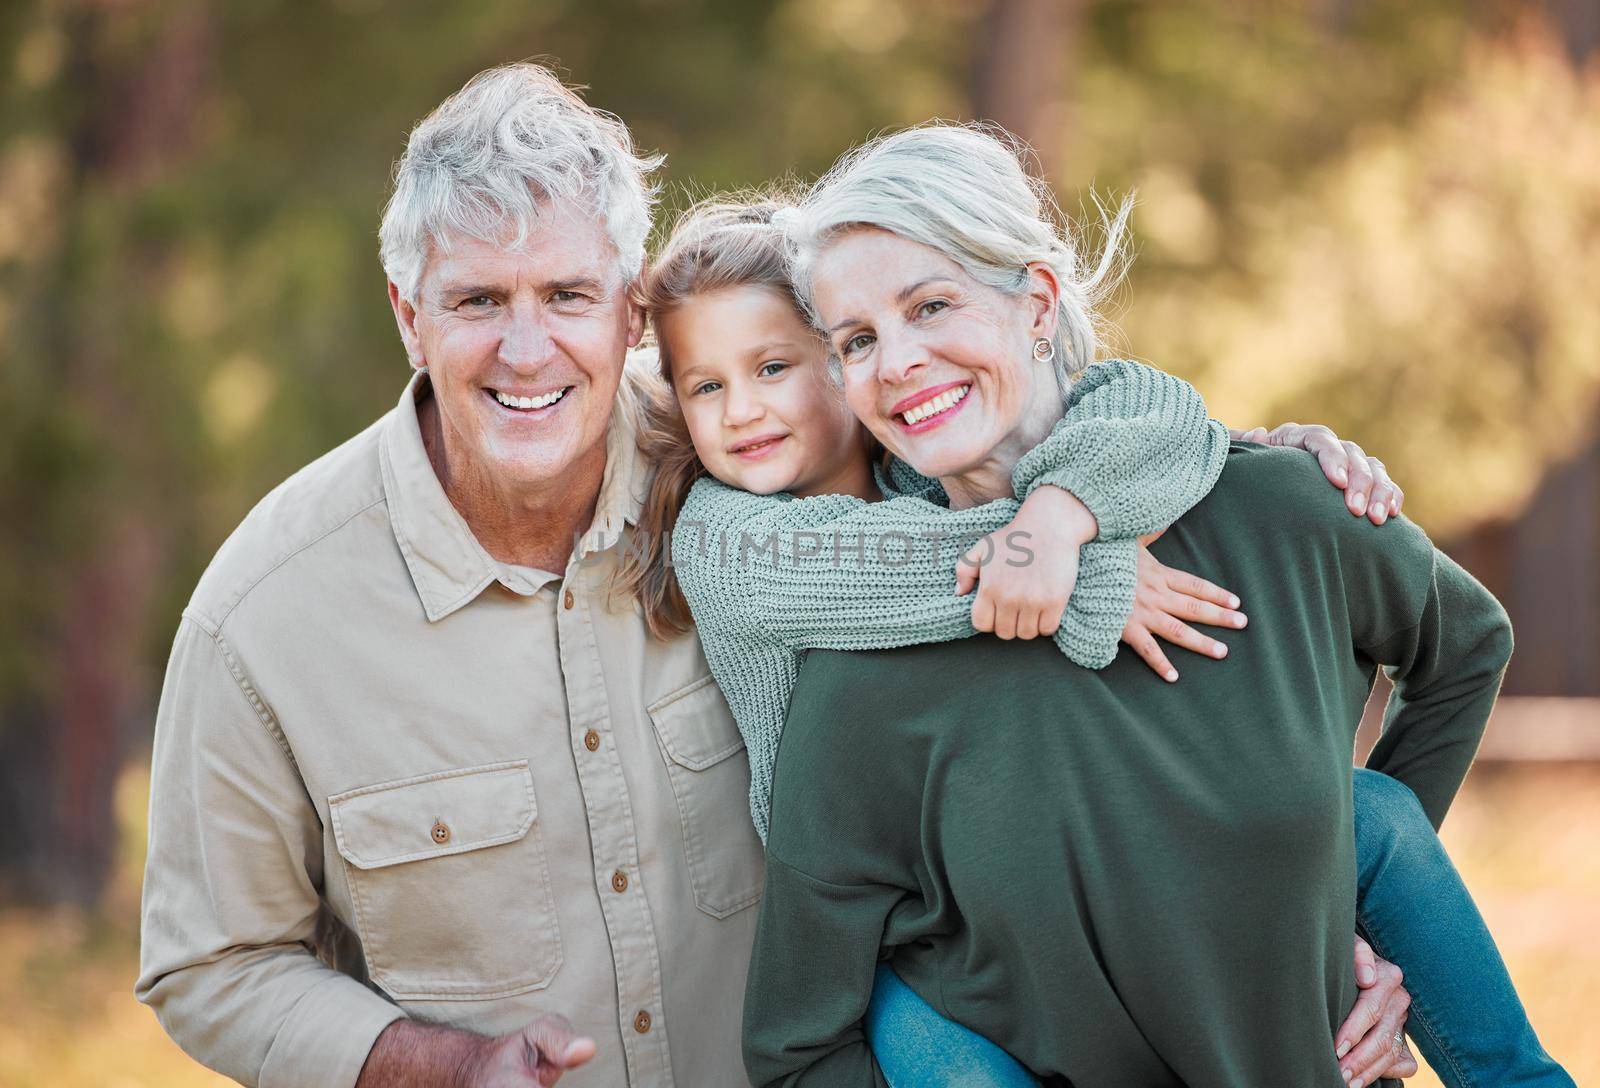 Shot of a senior couple spending time outdoors with their granddaughter.